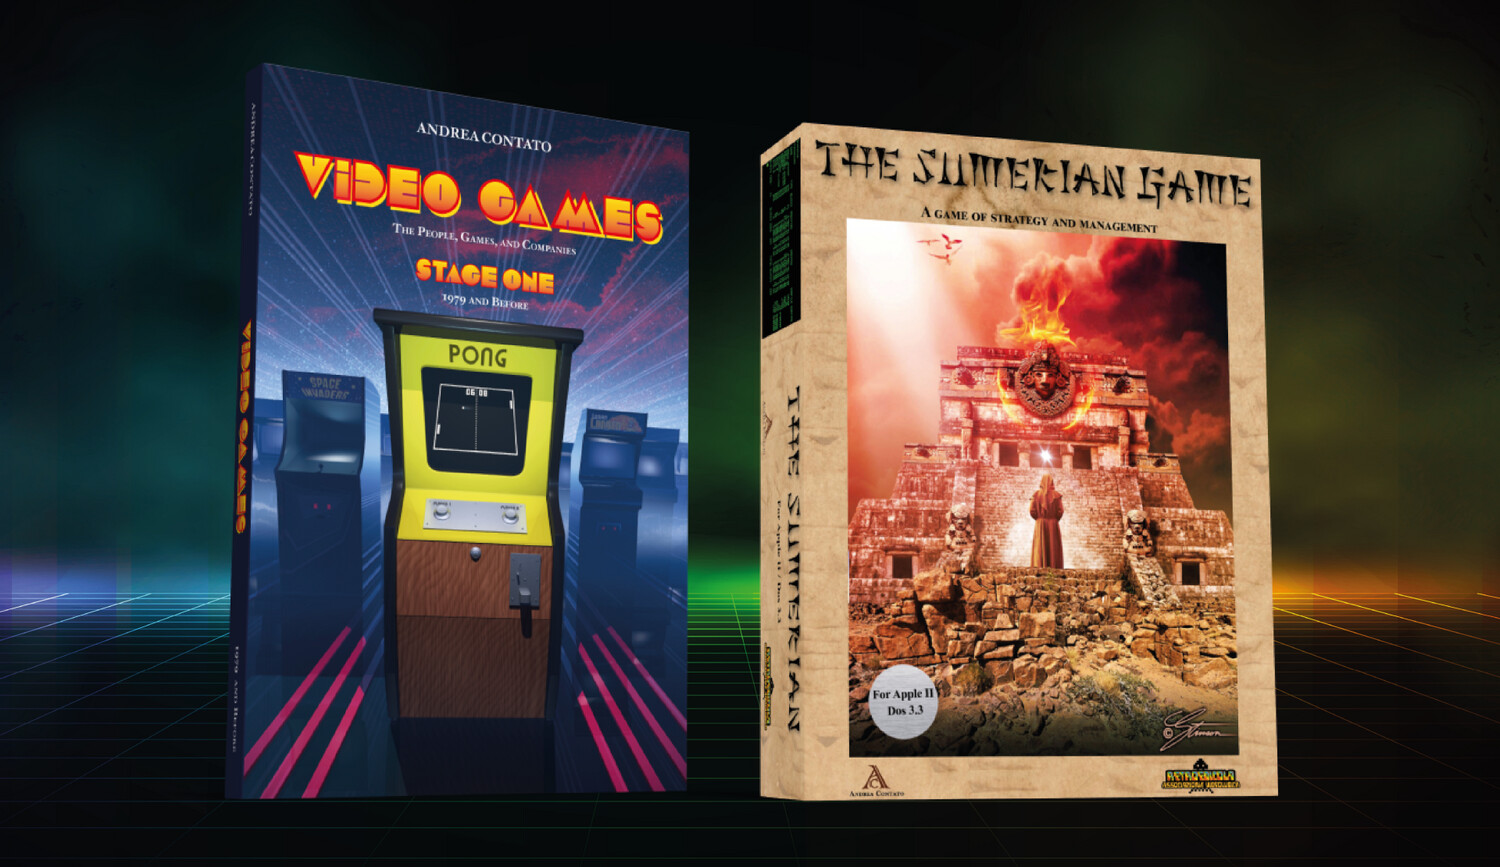 The Sumerian Game (Big Box limited ed from 6 to 10) + Video Games - Stage 1 (Hardcover - English - Preorder - Fall 2023)